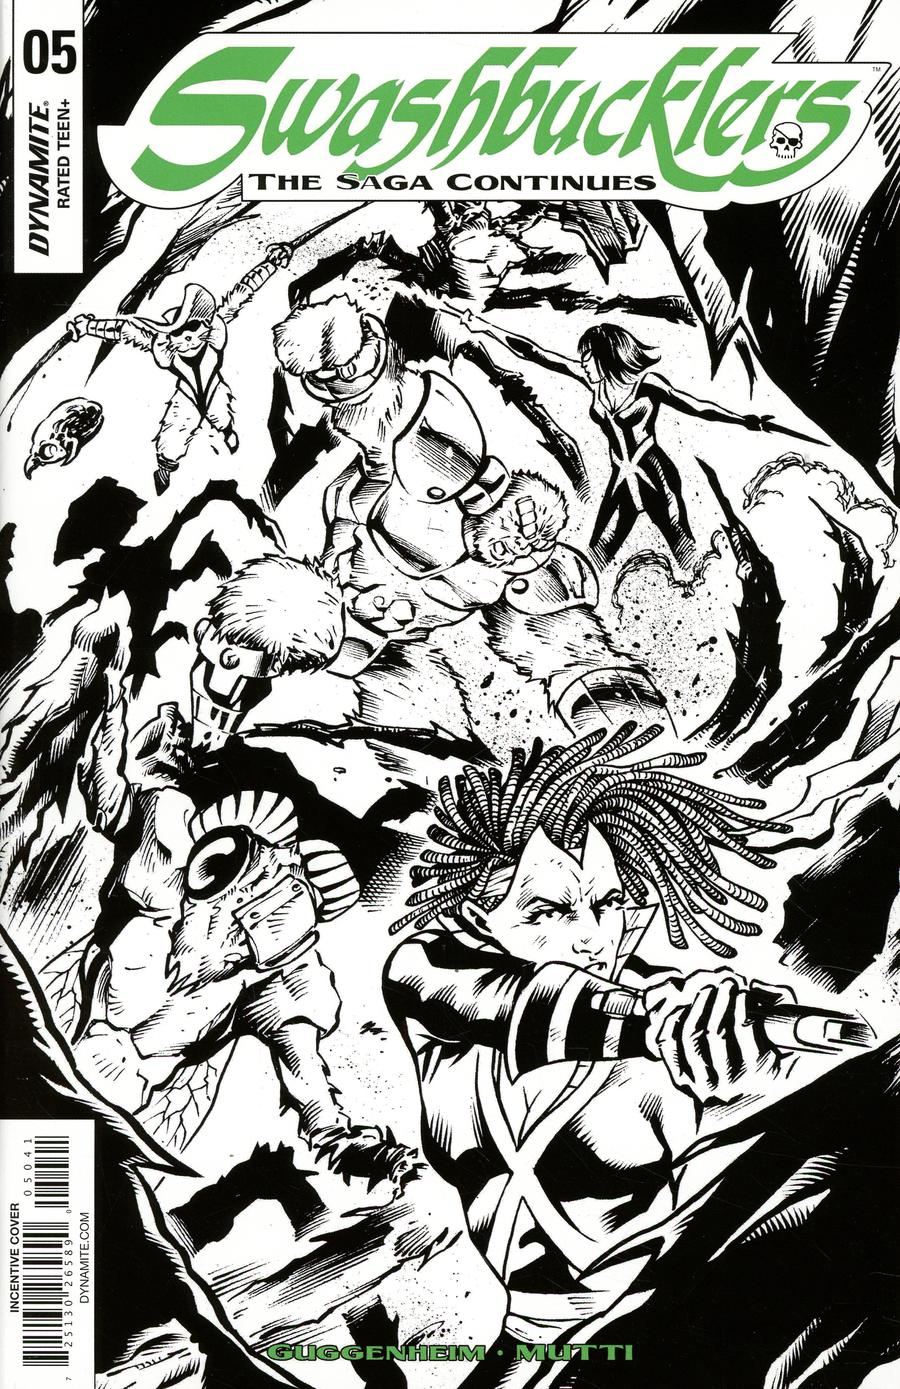 Swashbucklers Saga Continues #5 Cover D Incentive Andrea Mutti Black & White Cover